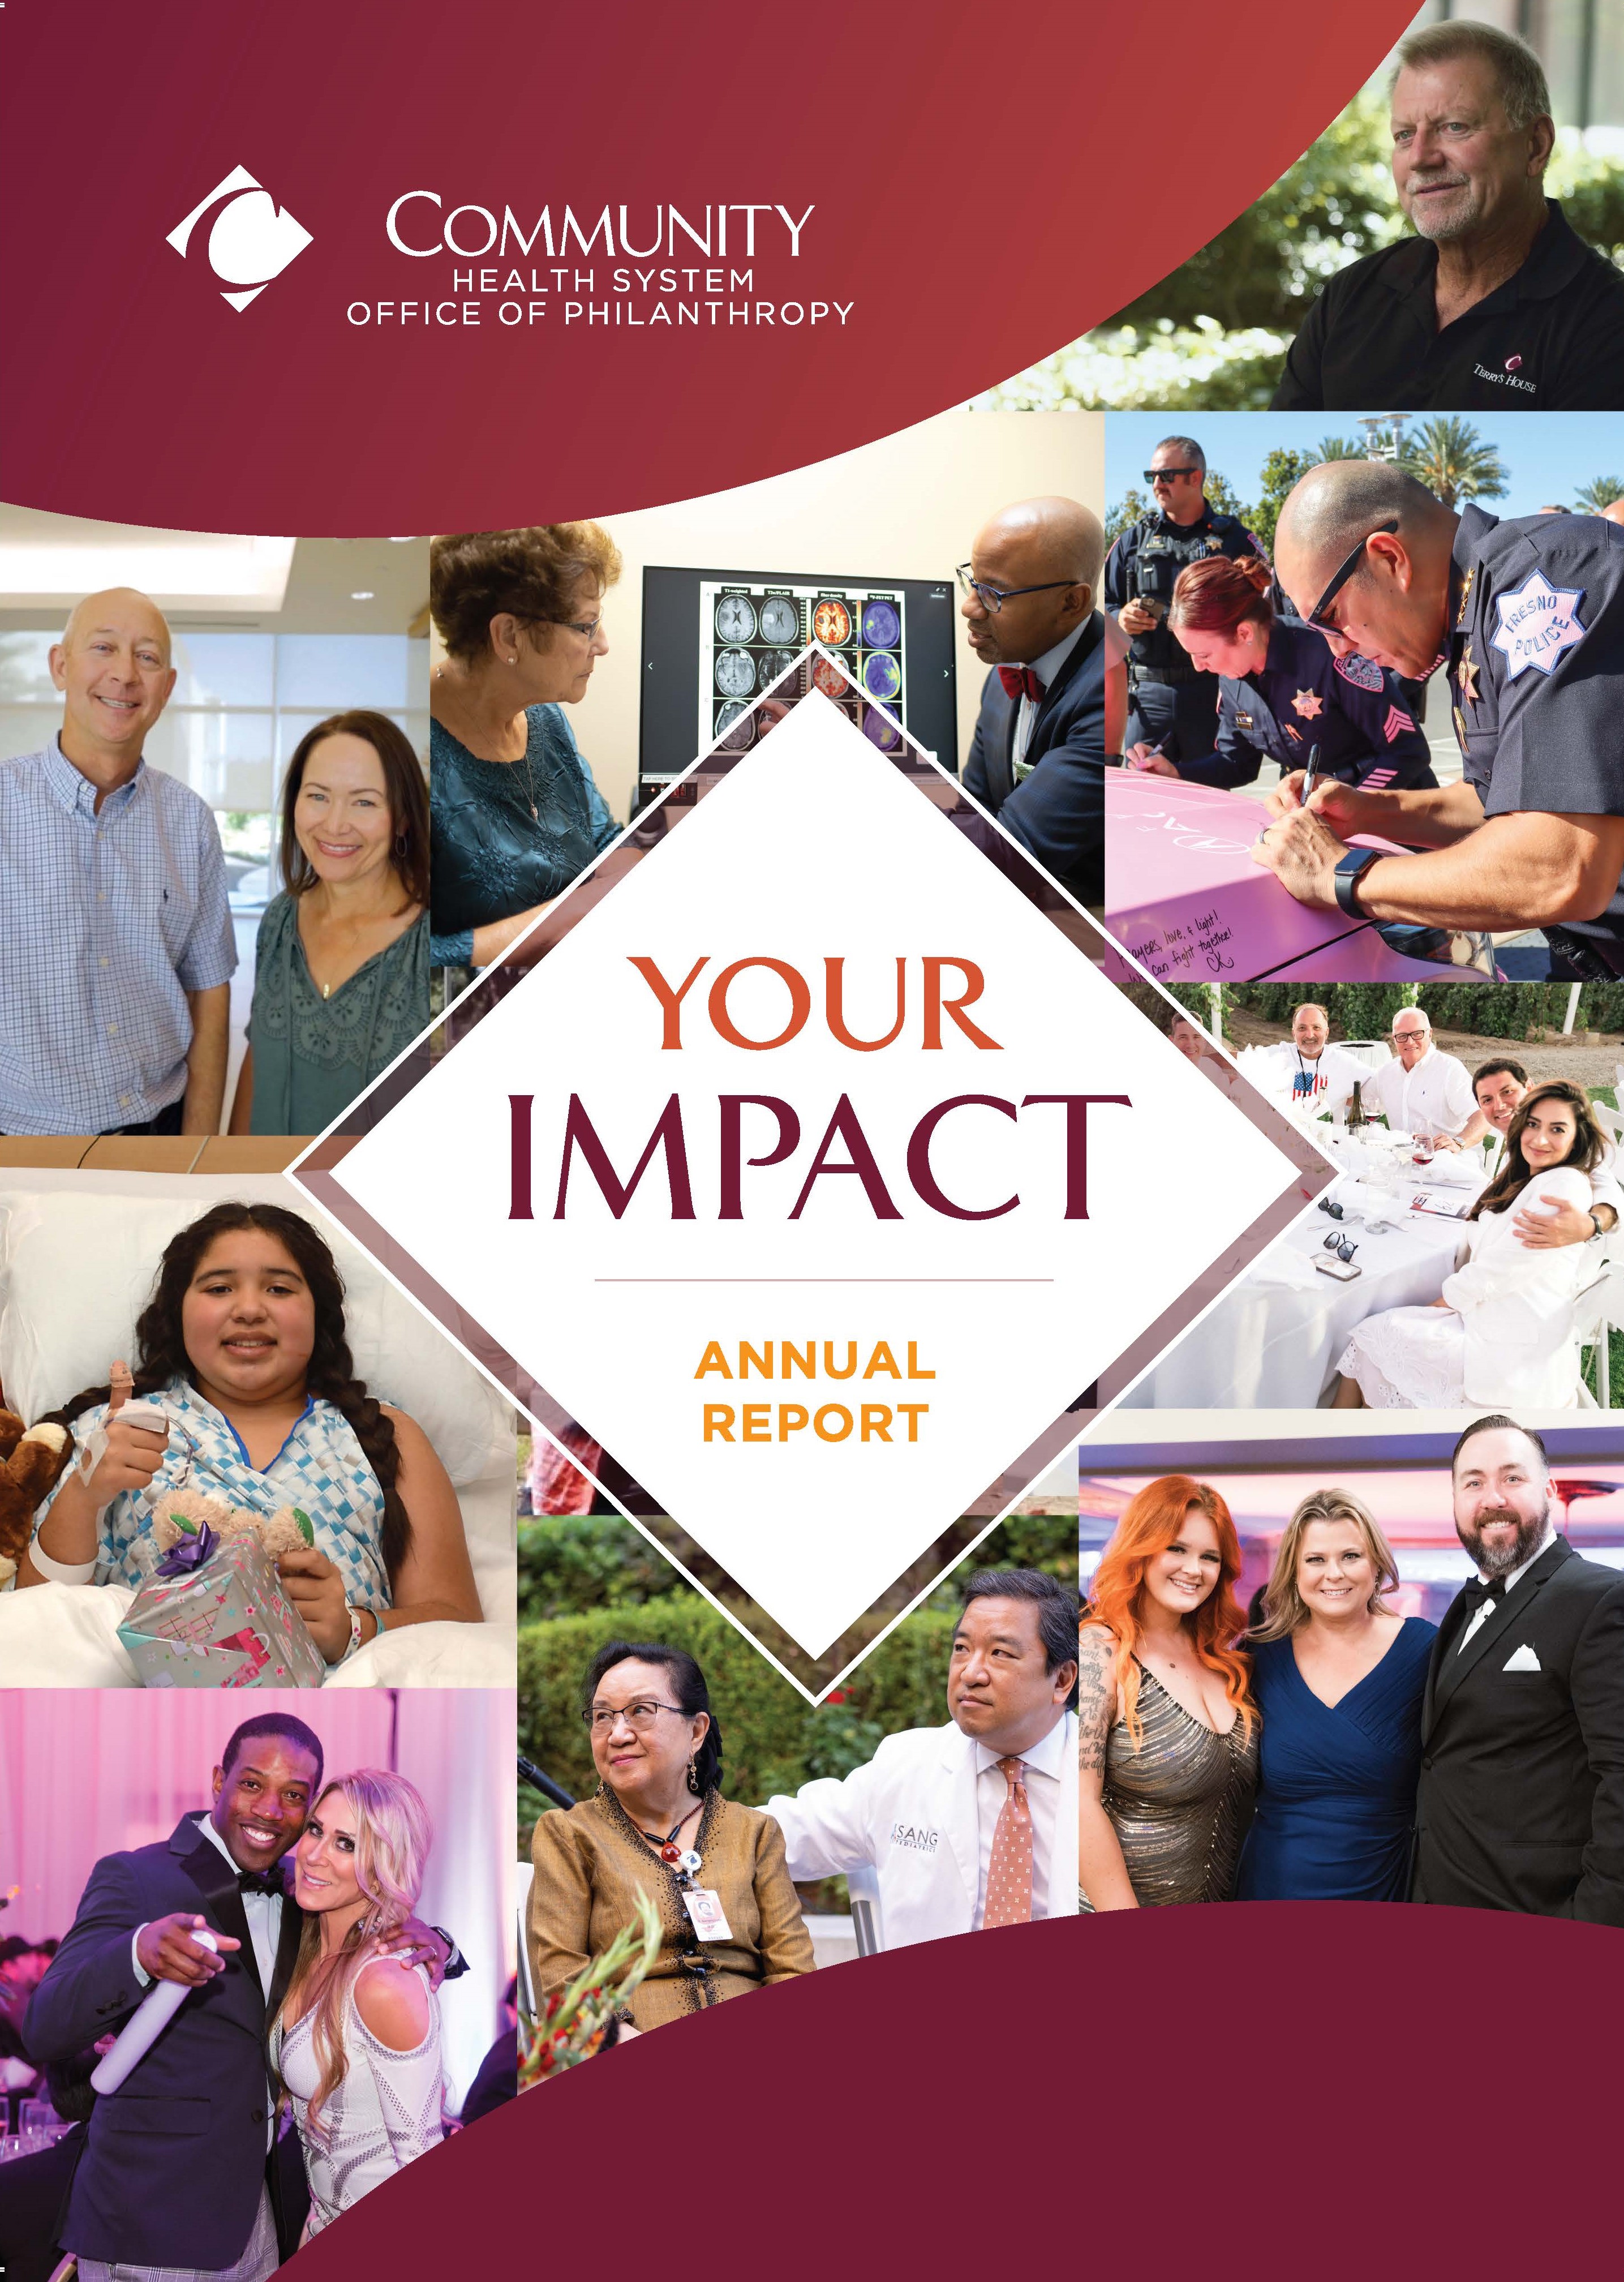 The cover of "Your Impact" annual report shows a collage of 9 different images showing members of the community